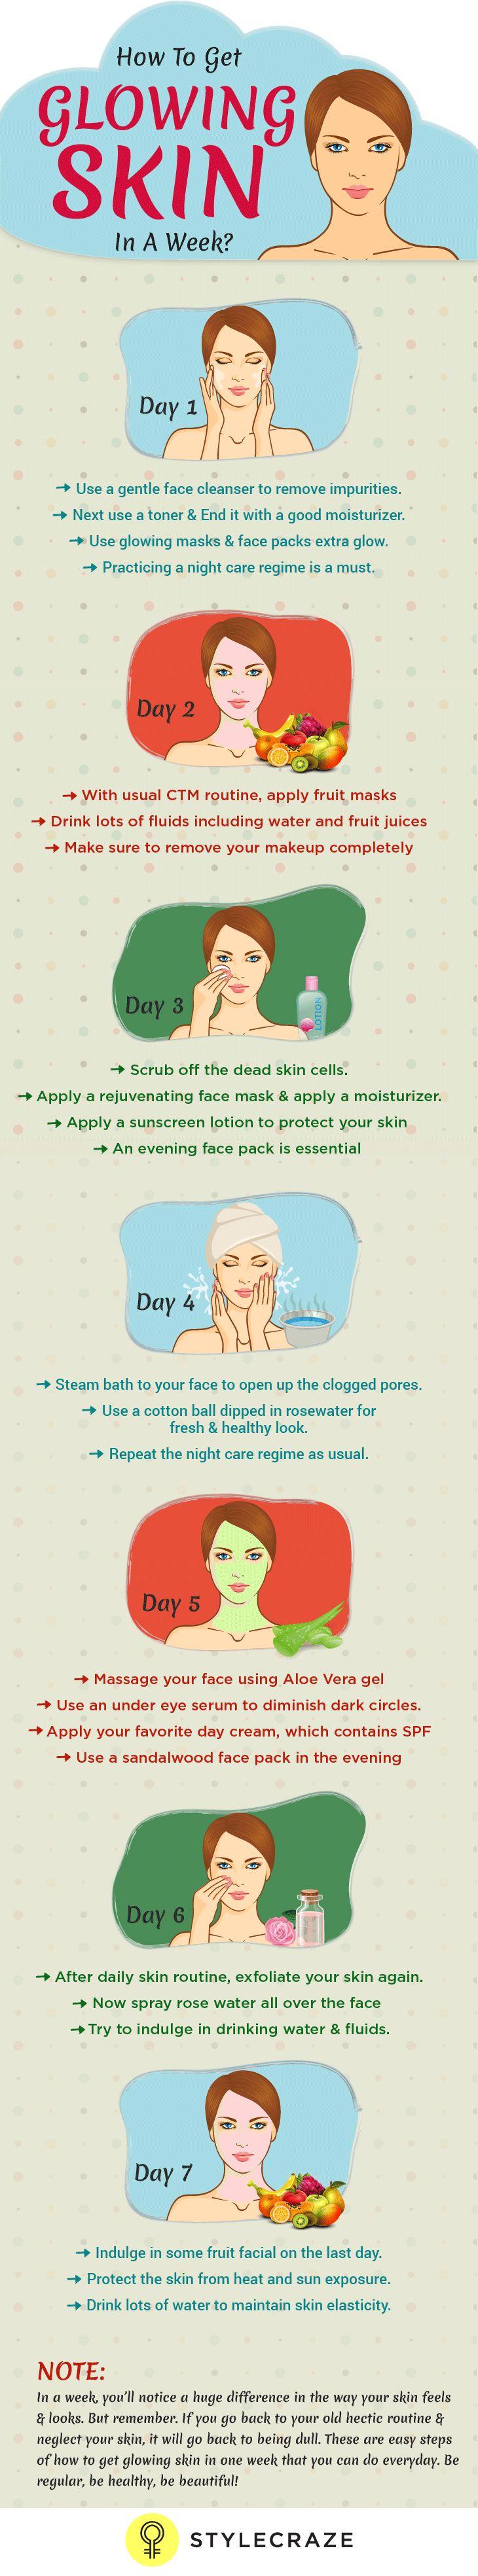 Wedding - How To Get Glowing Skin In 7 Days - With Day By Day Instructions